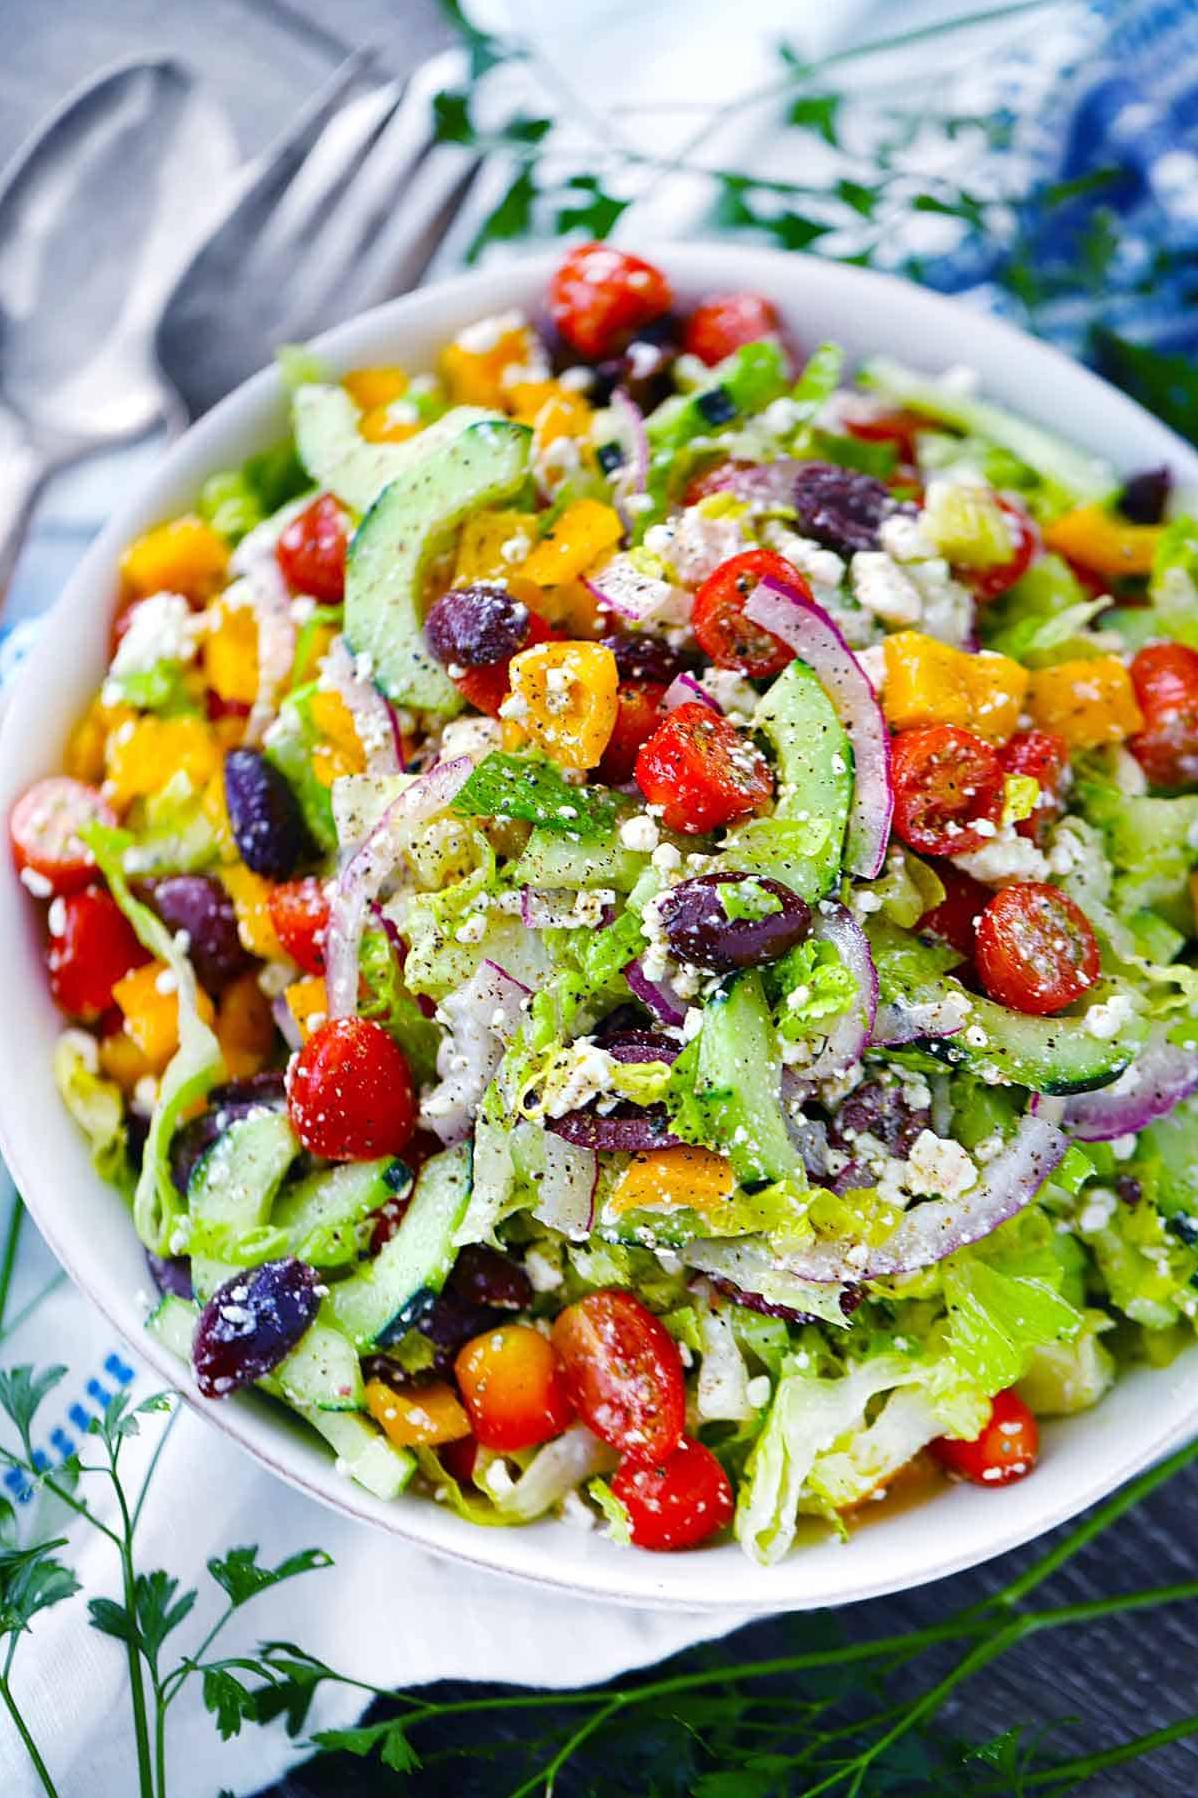  I could eat this Greek salad every day and never get tired of it.